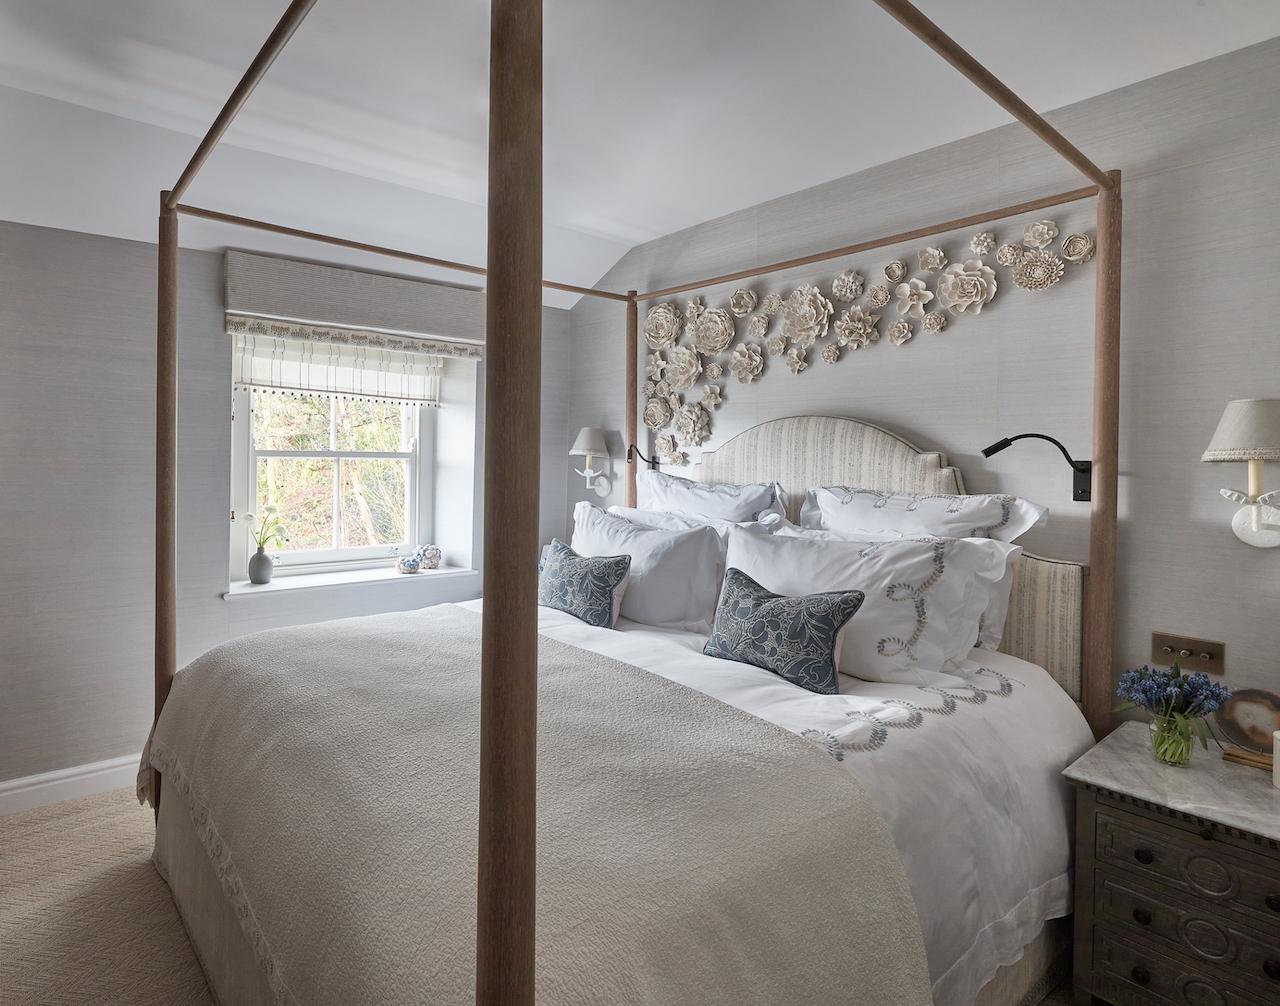 Katharine Pooley Restores a Cosy Holiday Cottage With Charming Design